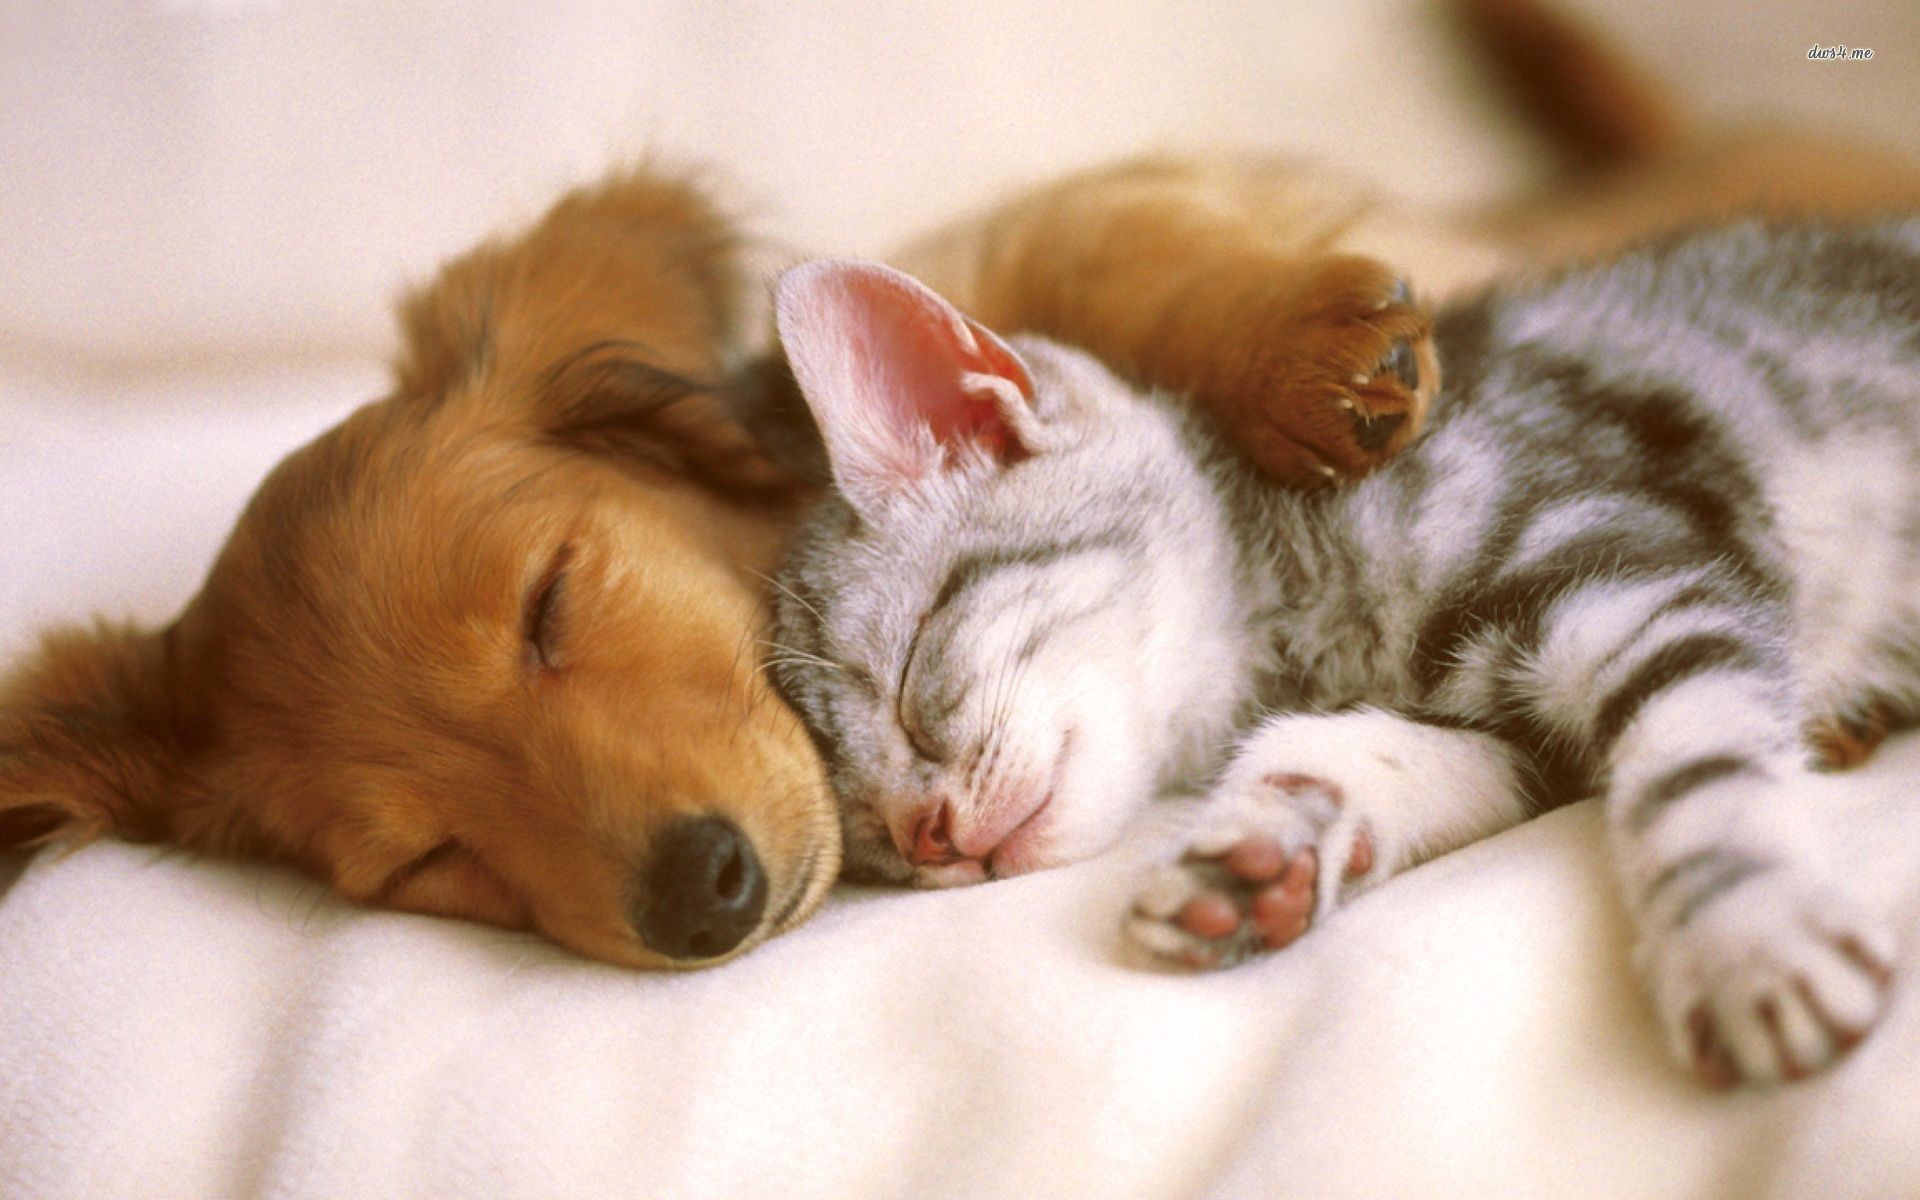 1920x1200 Cute Baby Puppies and Kittens Sleeping id: 4186 - 7HDWallpapers